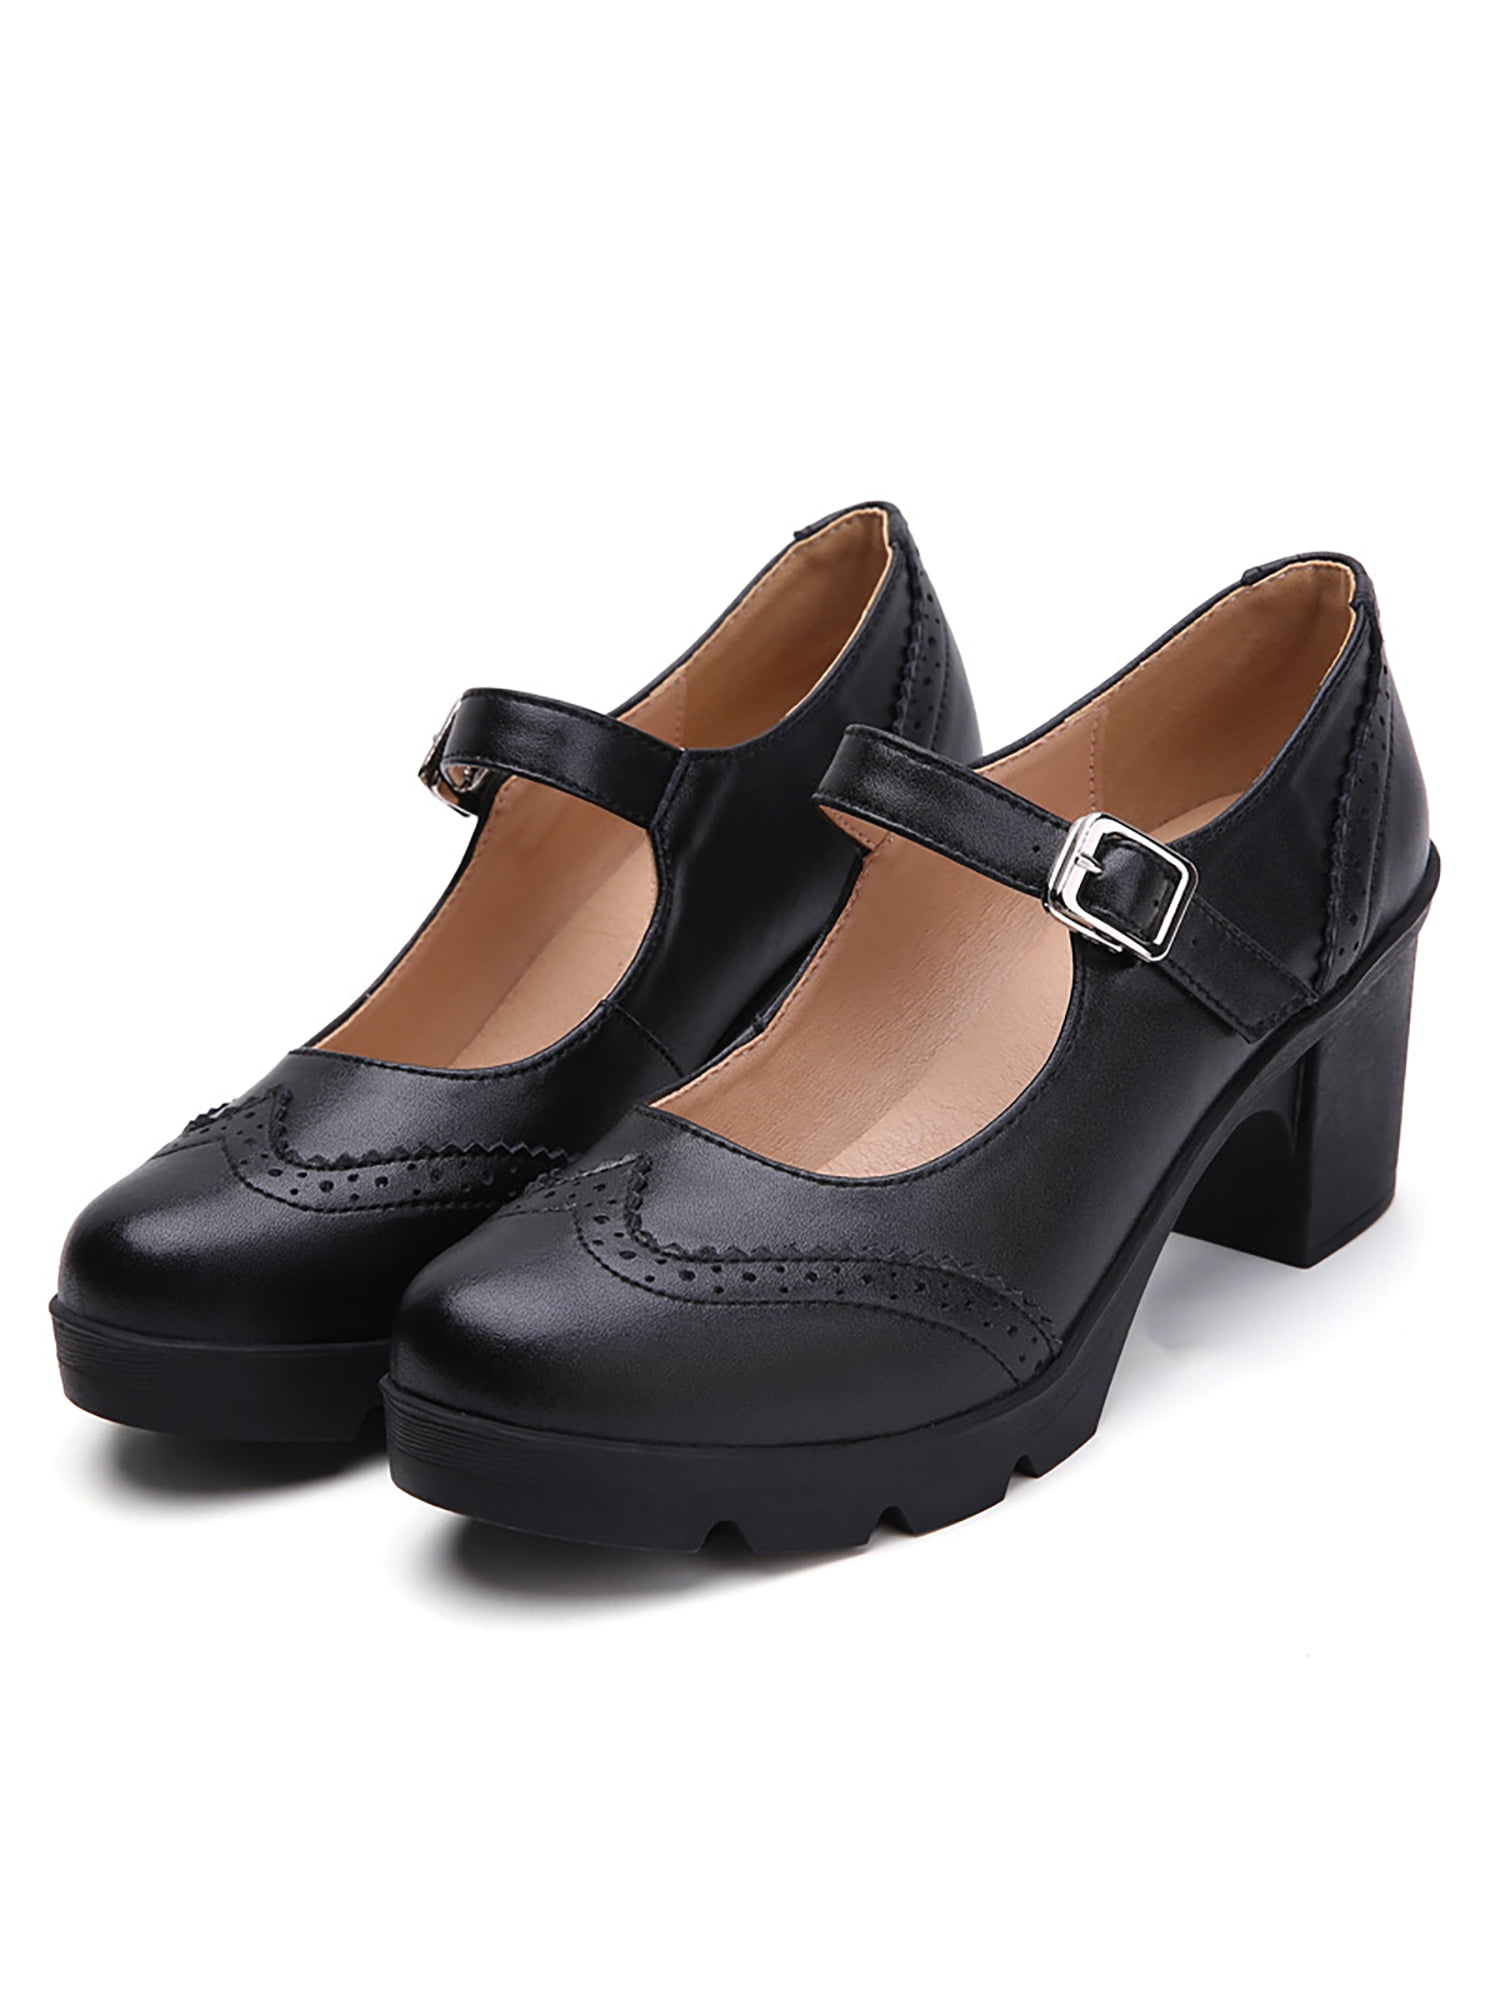 Sweet Women's Bowknot Round Toe Chunky Mid-High Heels Dress Casual Shoes Pumps # 